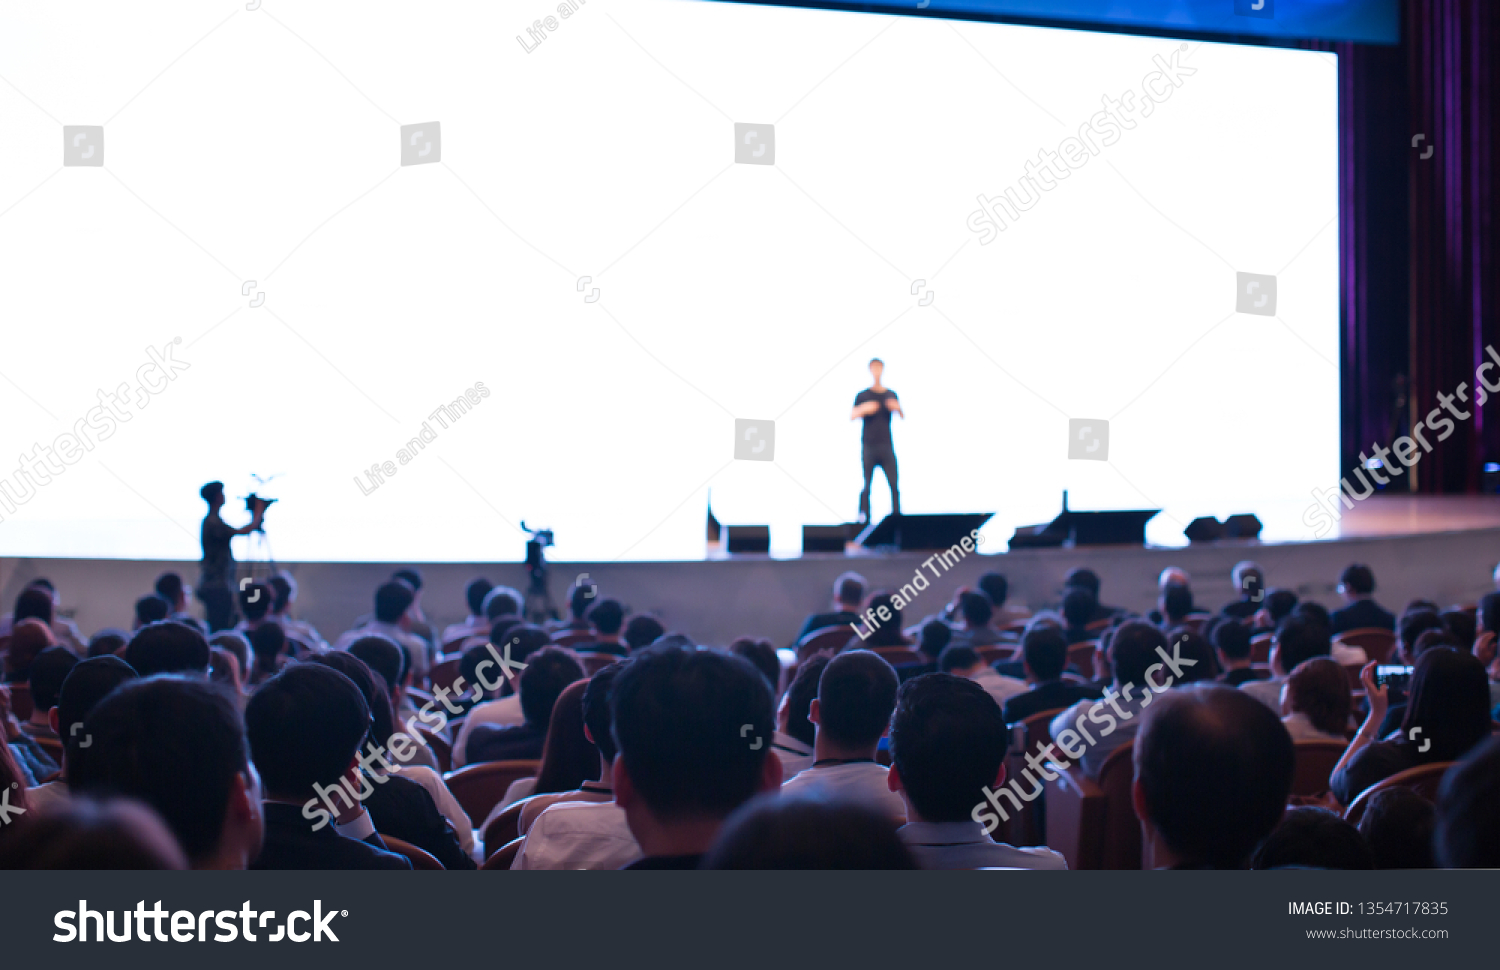 Speaker at Talk in Business Conference. Tech Executive Entrepreneur Speaker on Stage at Conference. Presenter Giving Business Presentation at Meeting. Corporate Exhibition for Investors Event.
 #1354717835